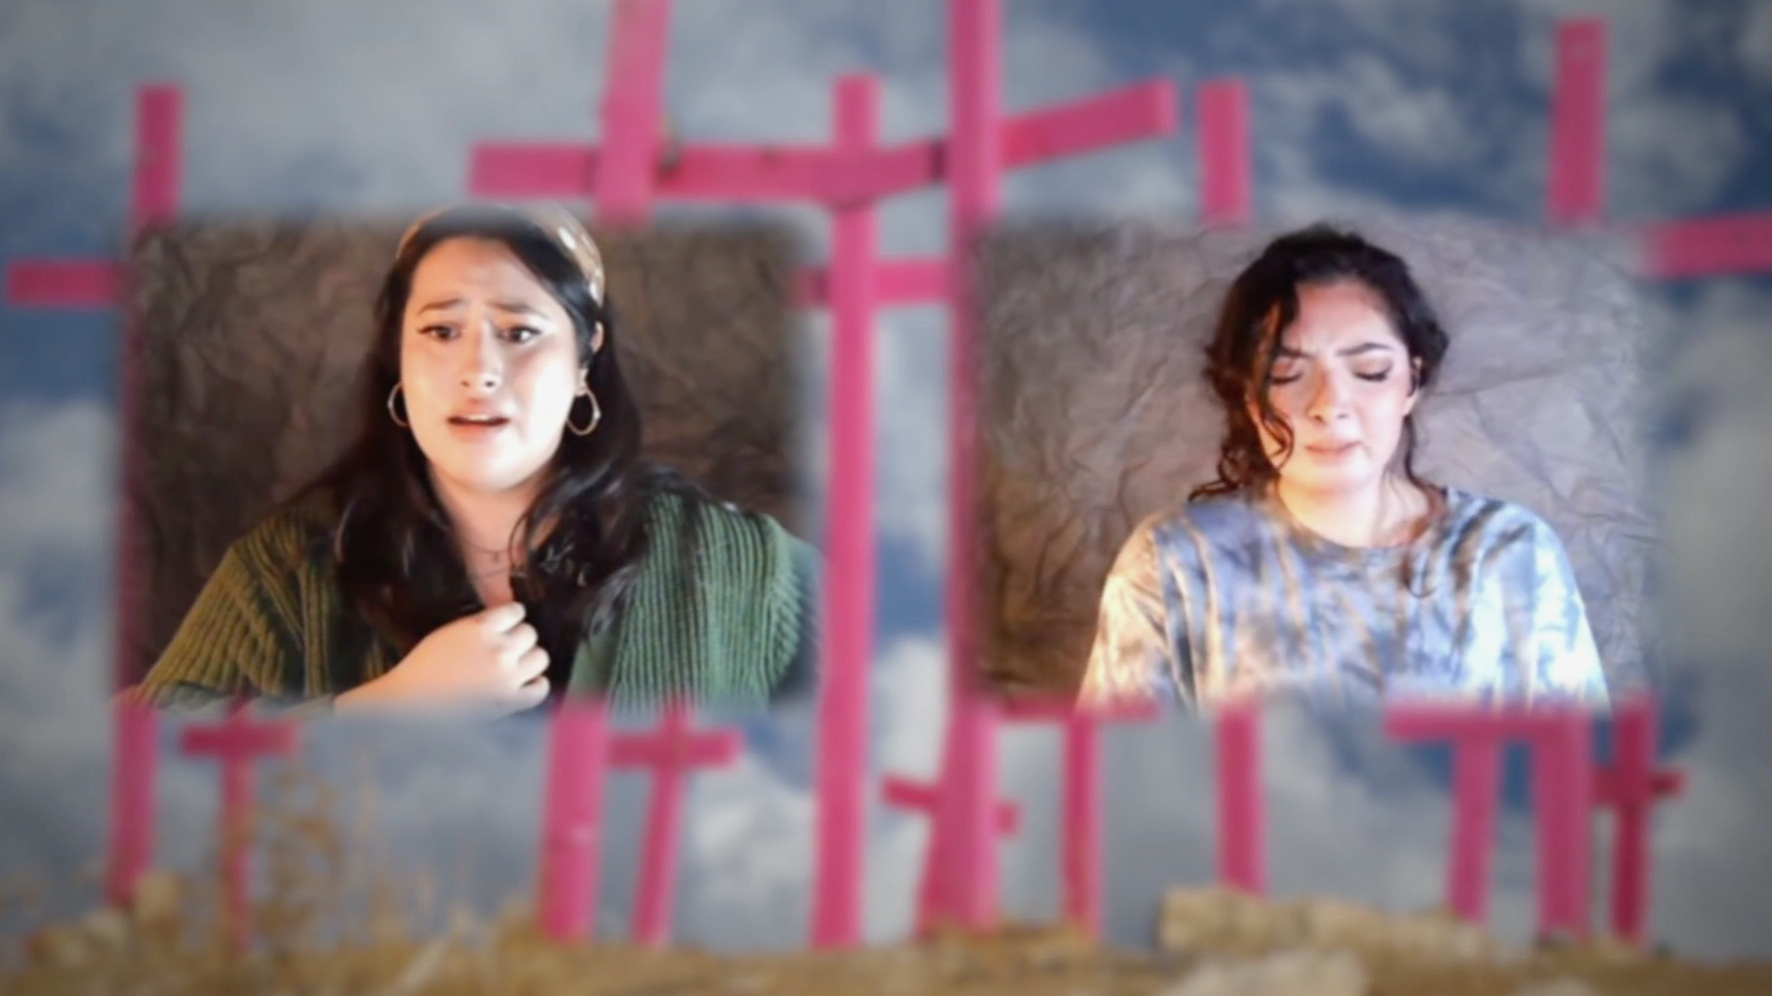 two actresses hold back tears, performing remotely with pink crosses in the background